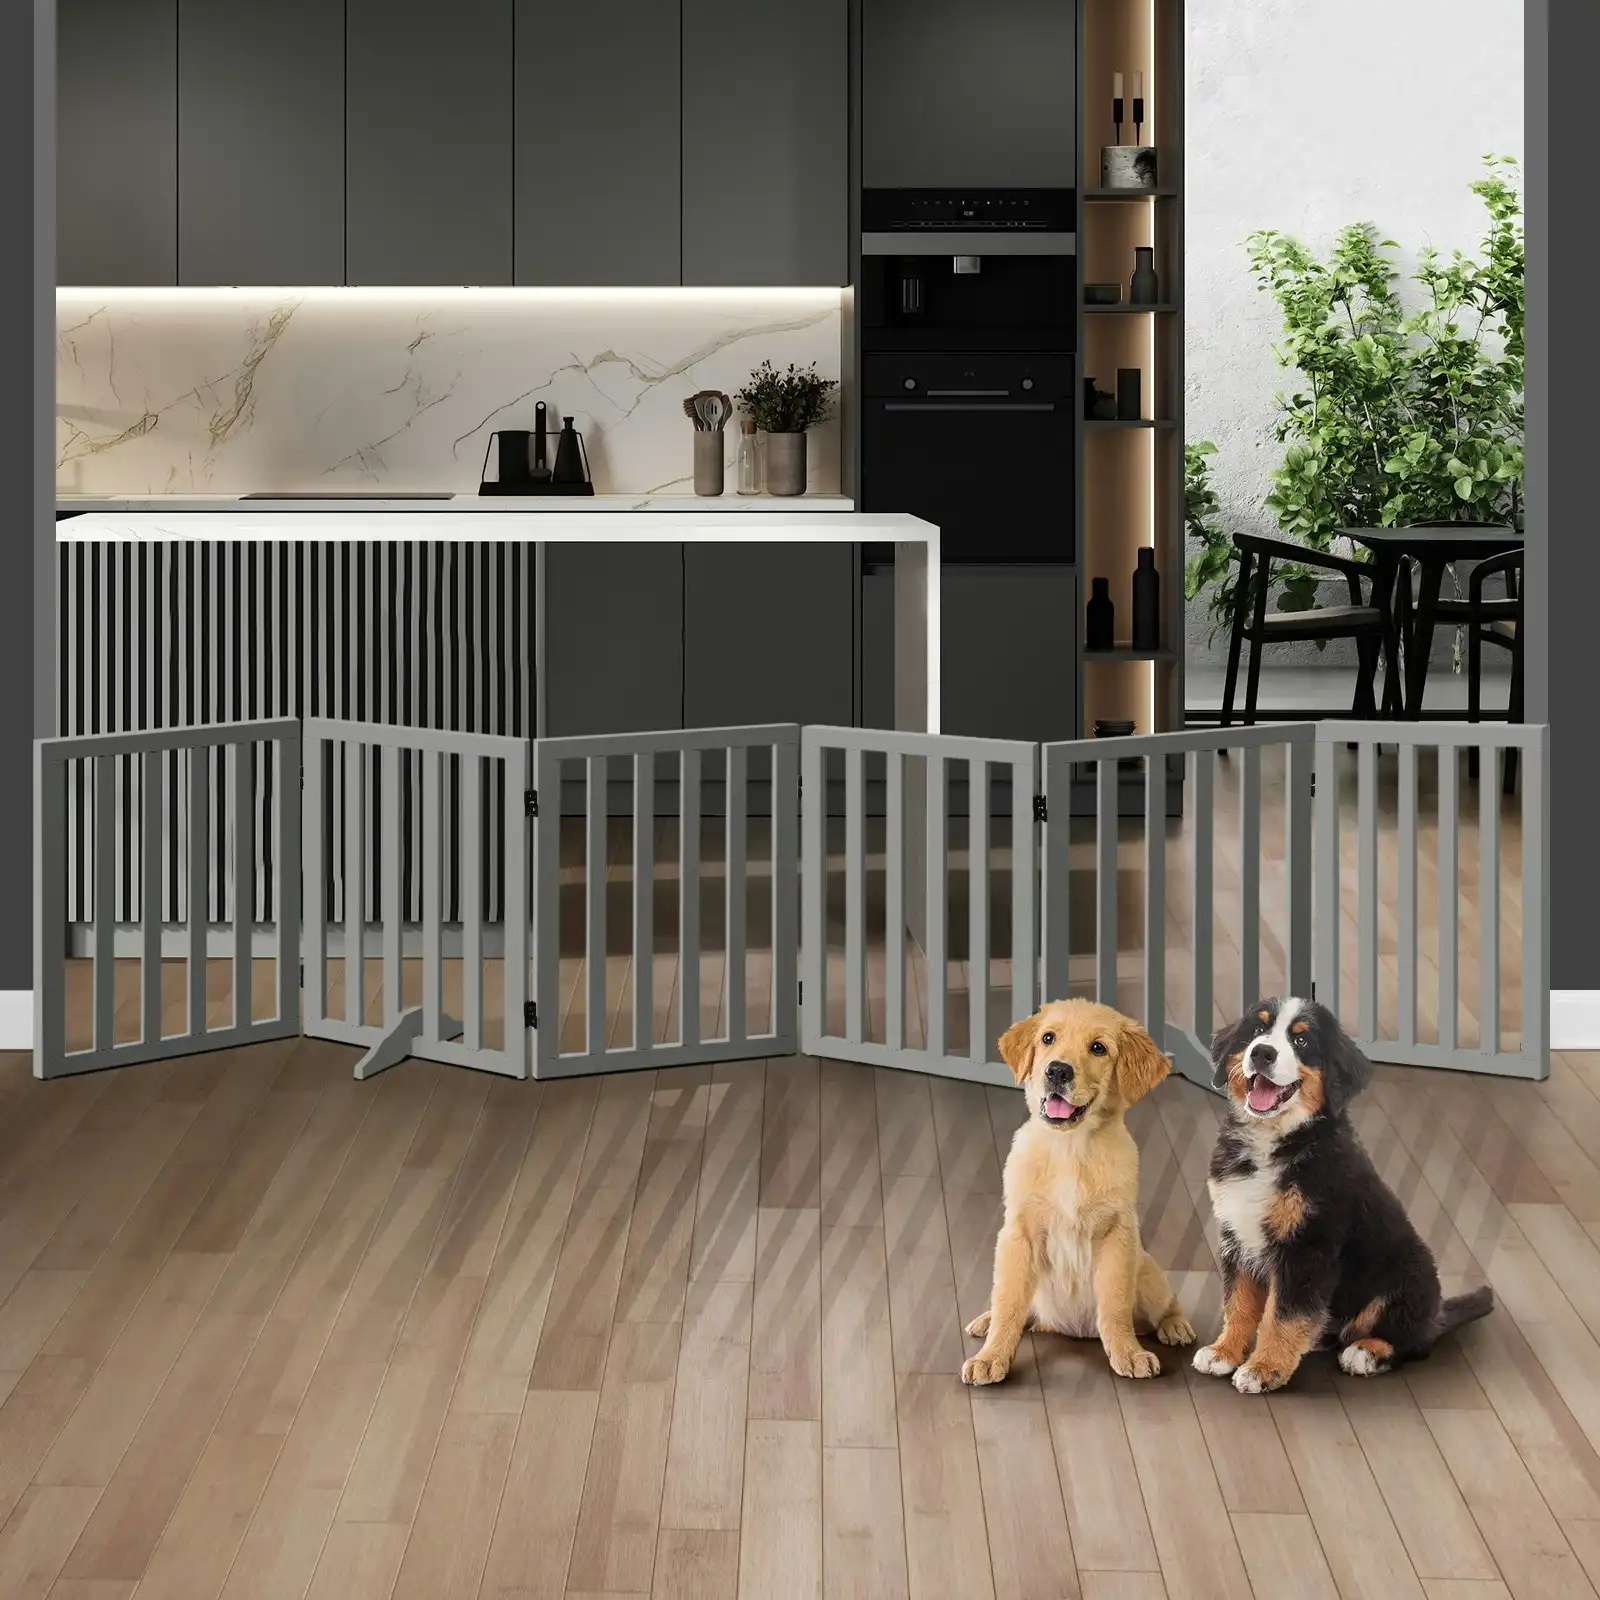 Alopet Wooden Pet Gate Dog Fence Safety Stair Barrier Security Door 6-Panel Grey